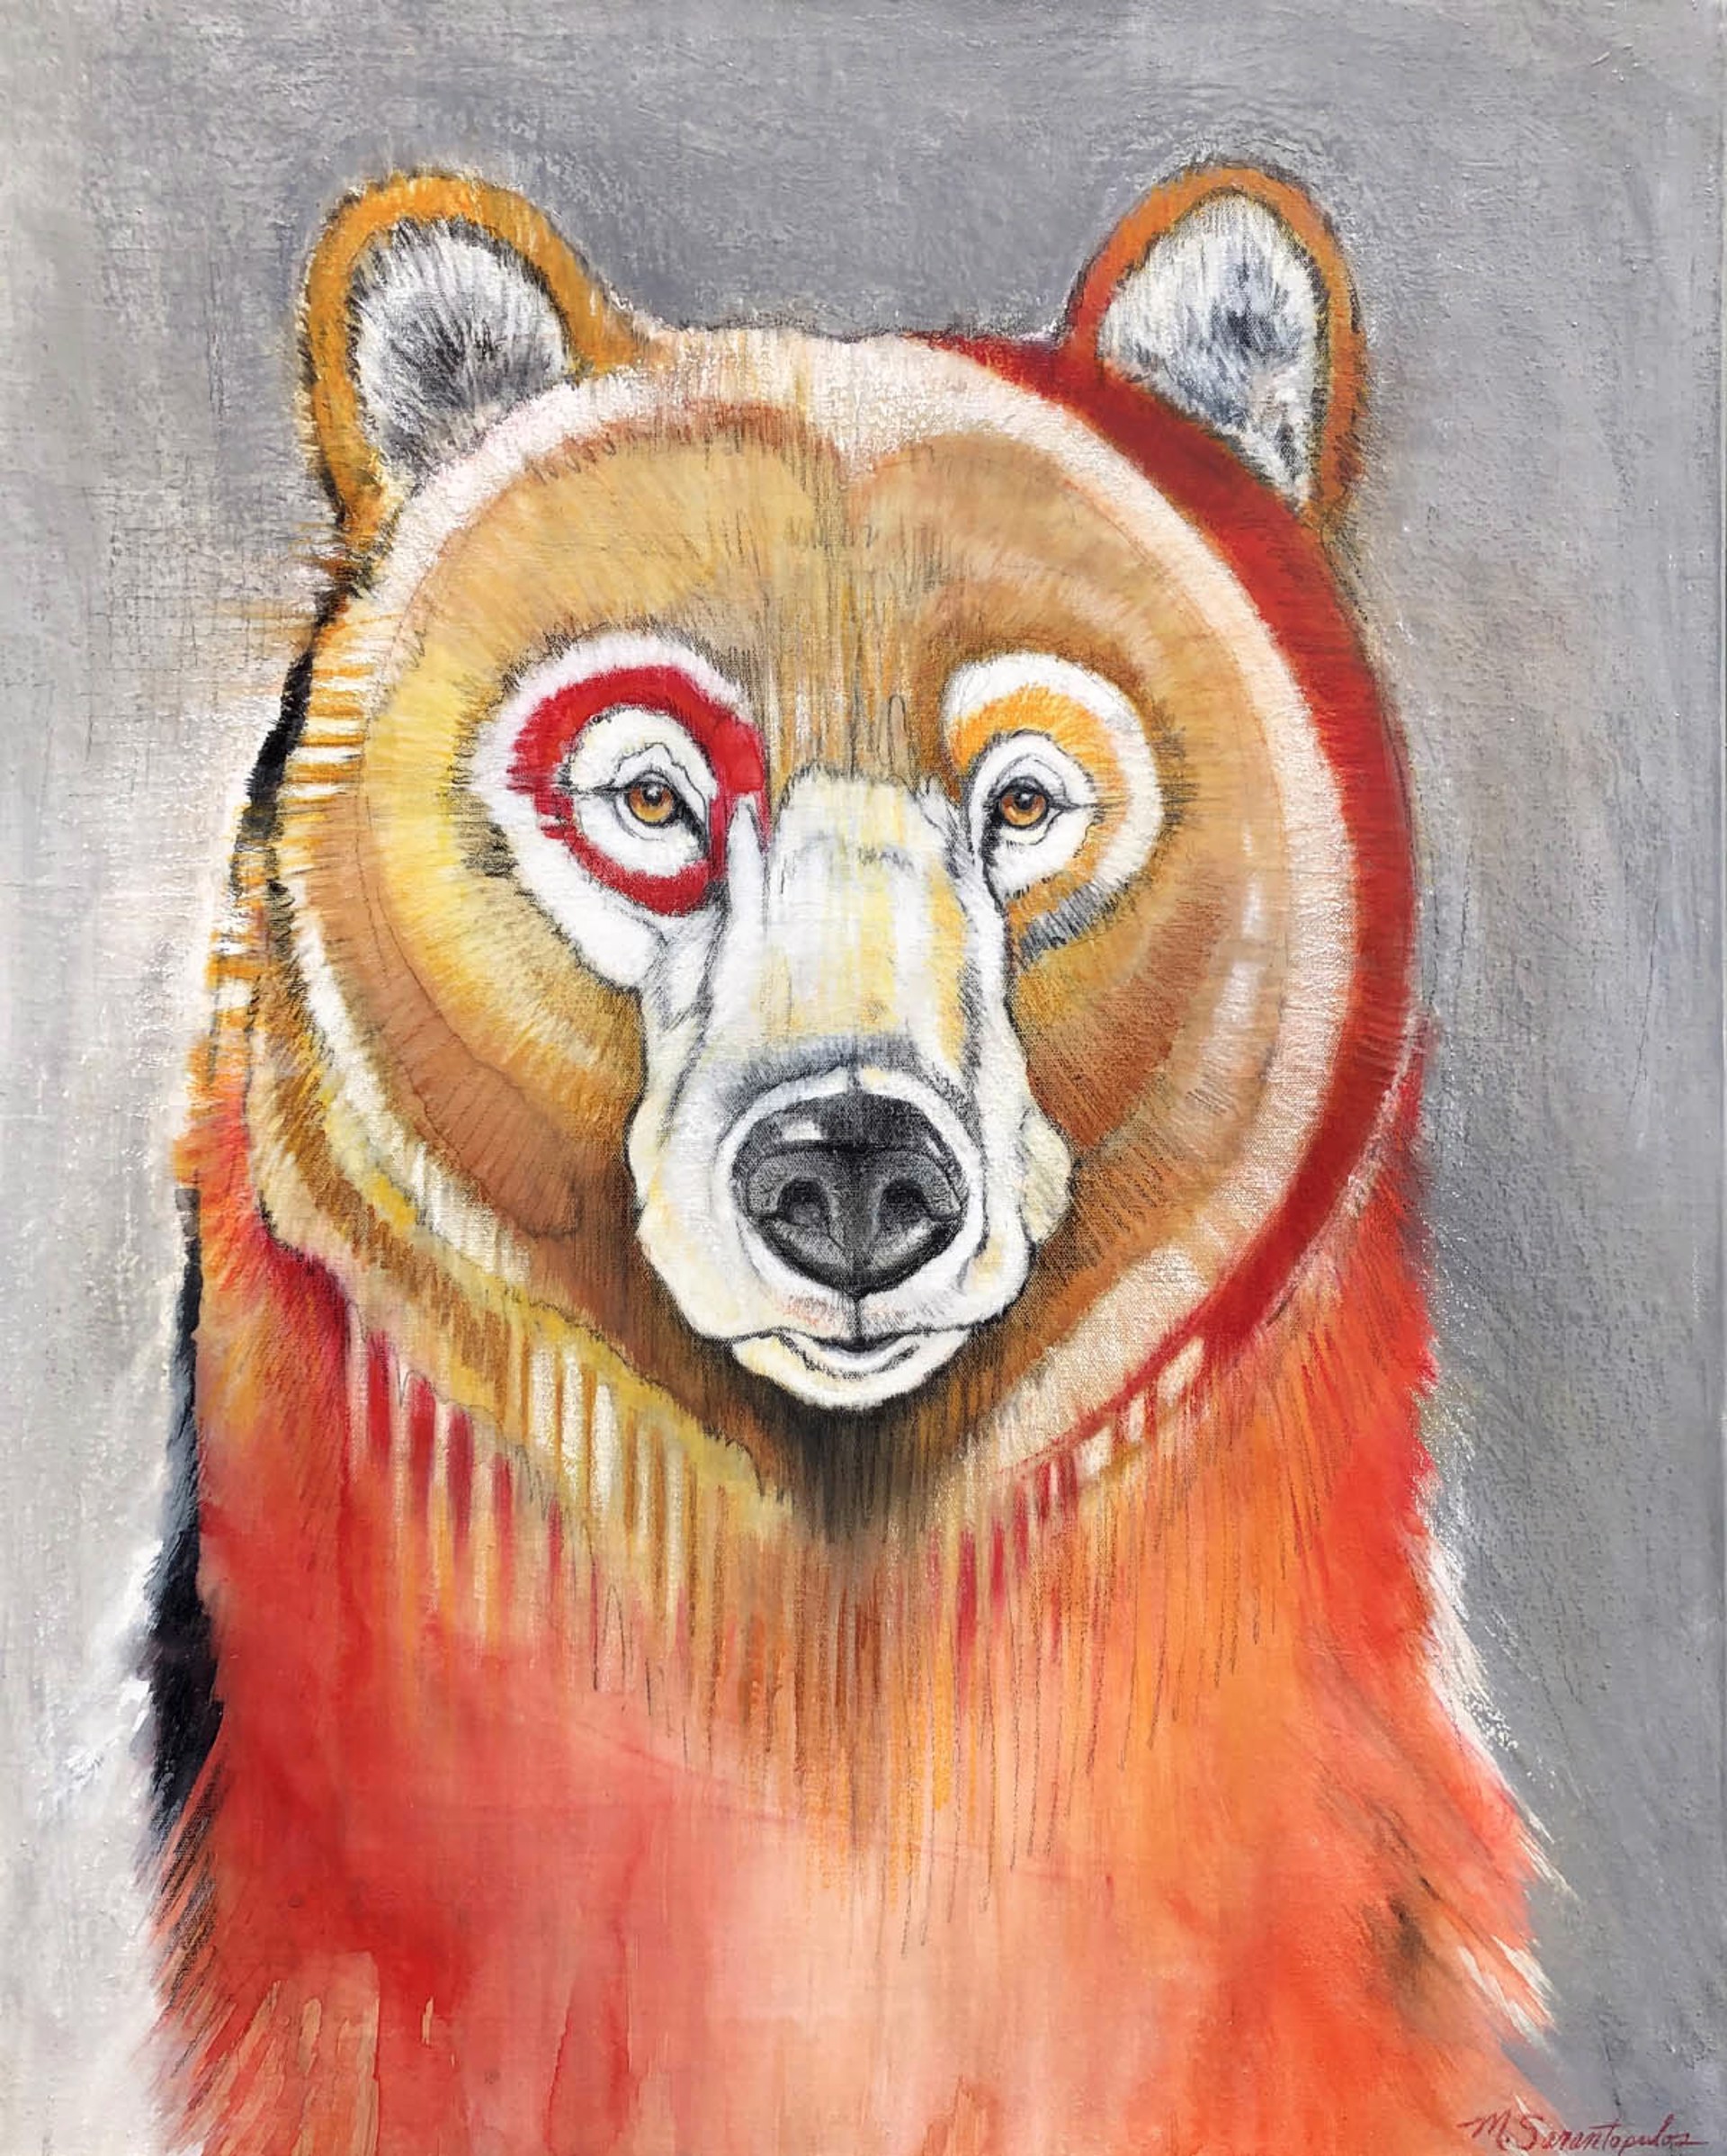 Original Mixed Media Painting Featuring A Bear Portrait In Reds Over Abstract Gray Background